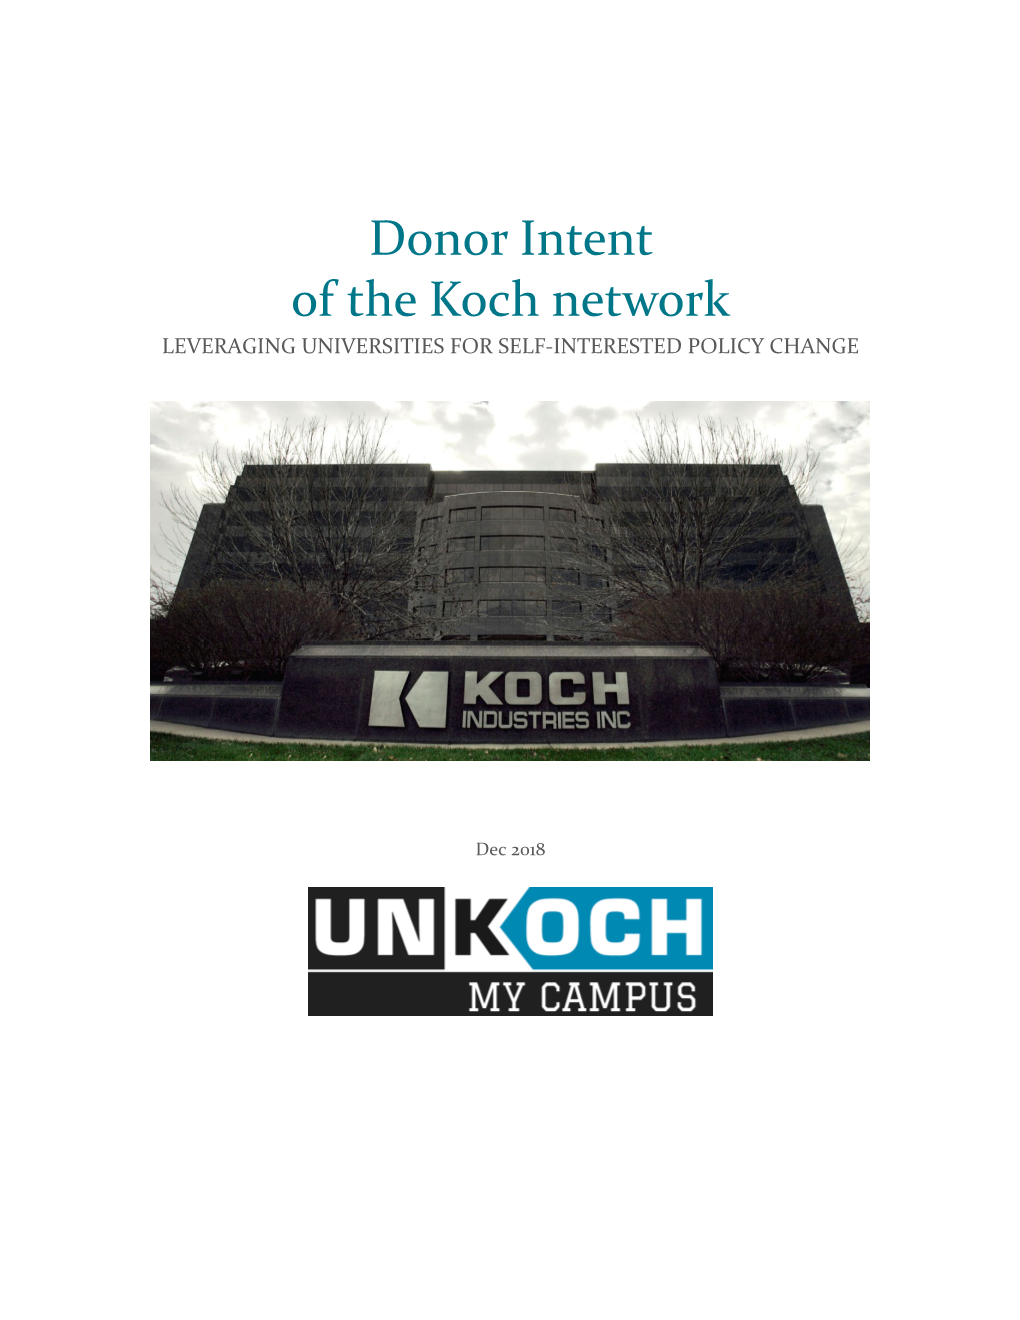 Donor Intent of the Koch Network LEVERAGING UNIVERSITIES for SELF-INTERESTED POLICY CHANGE